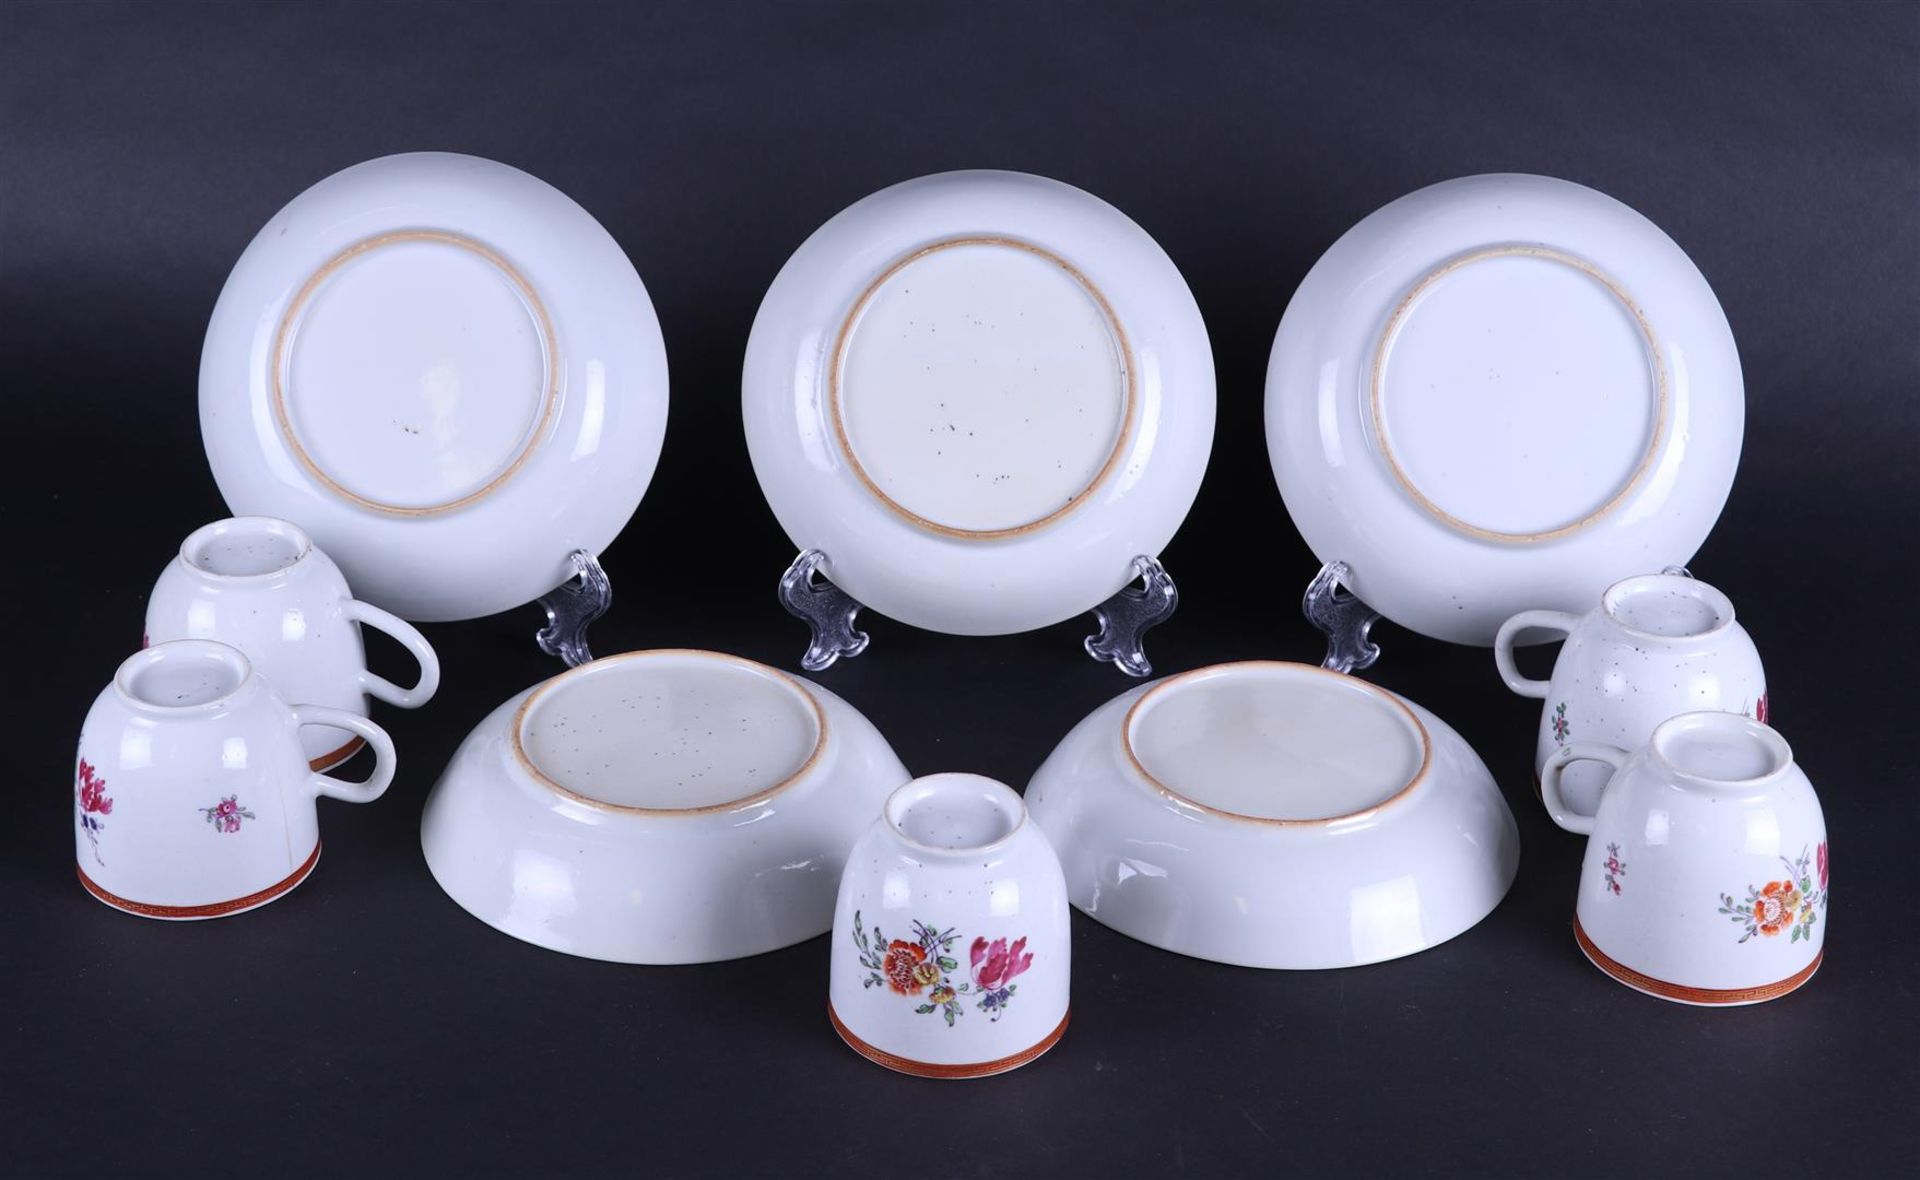 A set ofÊ(5) porcelain Famile Rose cups and saucers. China, 18th century.
Diam. 14 cm. - Image 2 of 3